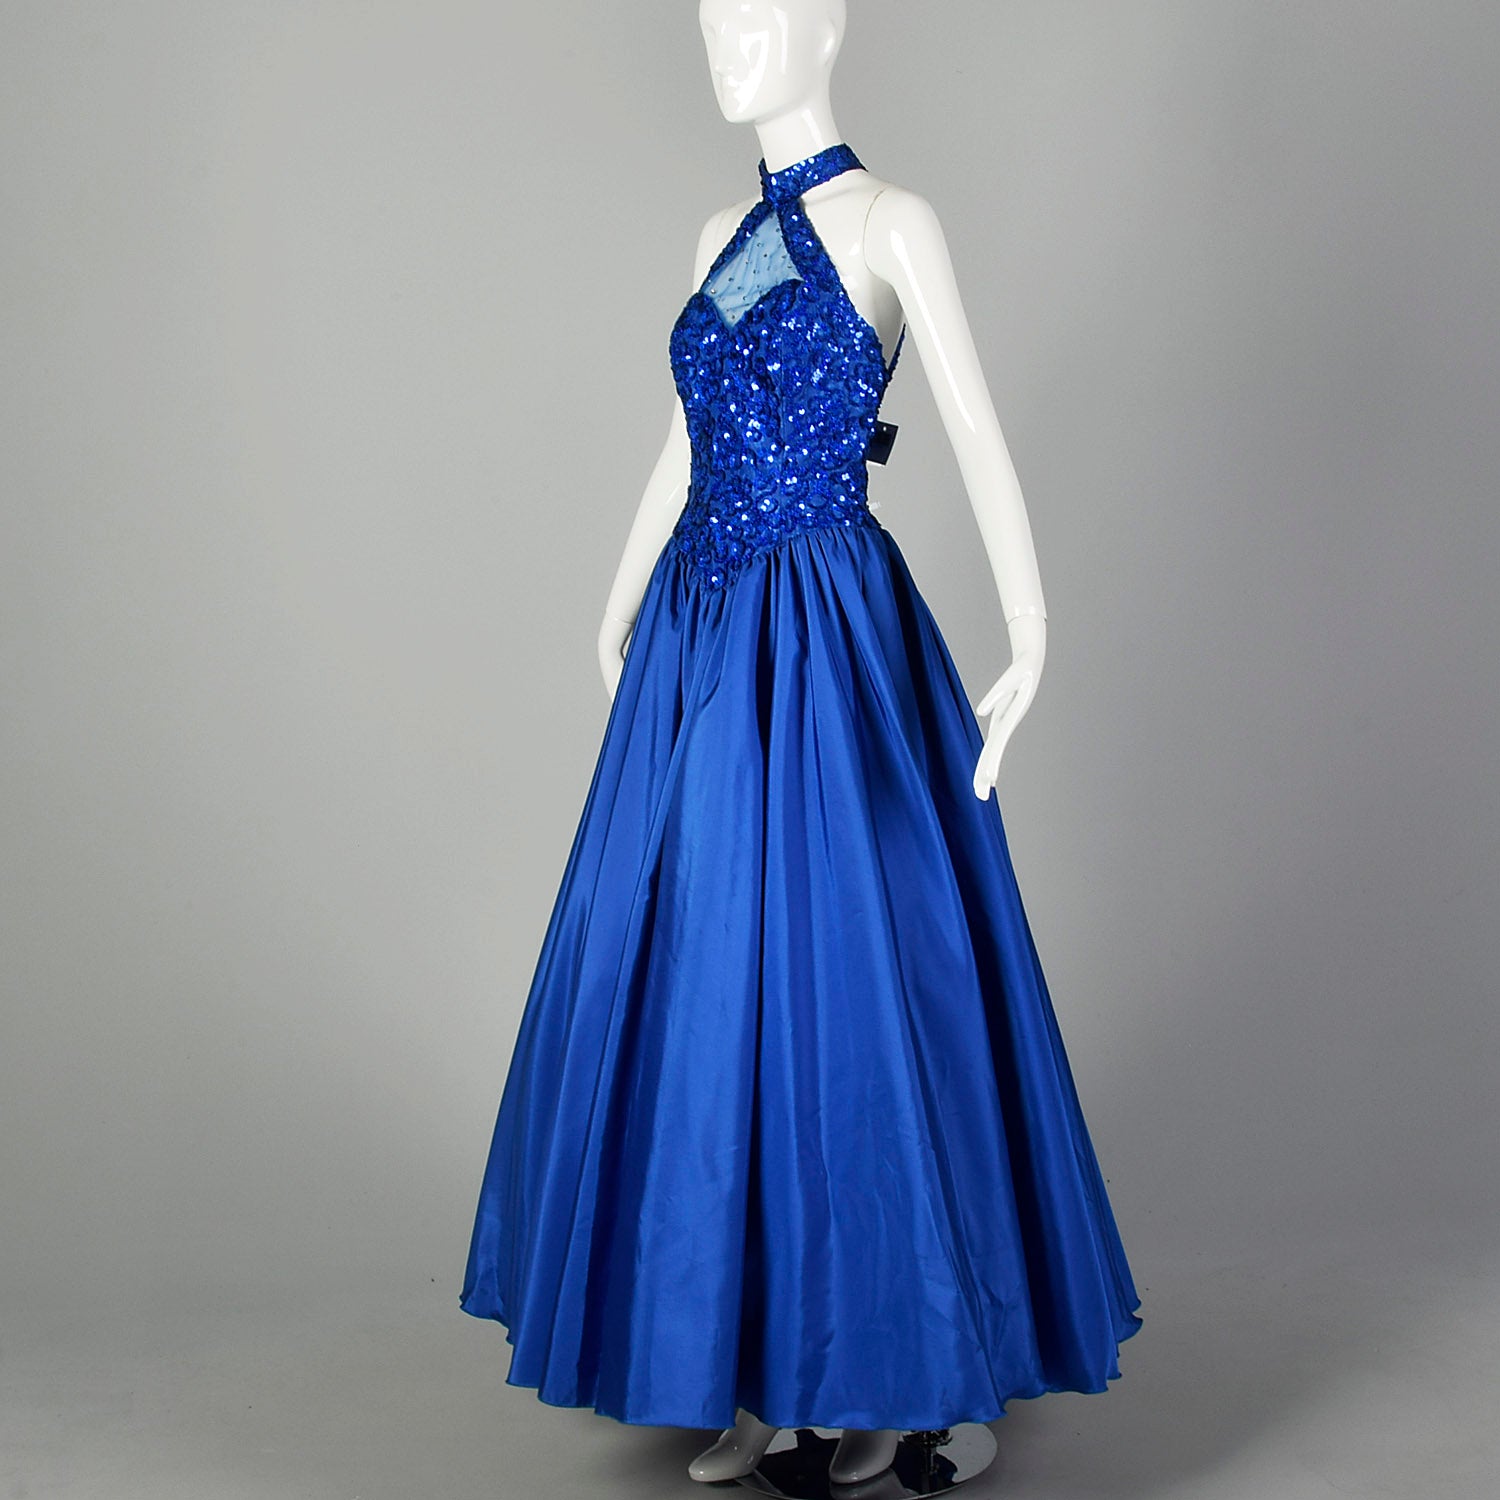 Small 1980s Ballgown Mike Bennet Dress Royal Blue Sequin Gown Prom Pageant Formal Event Full Skirt